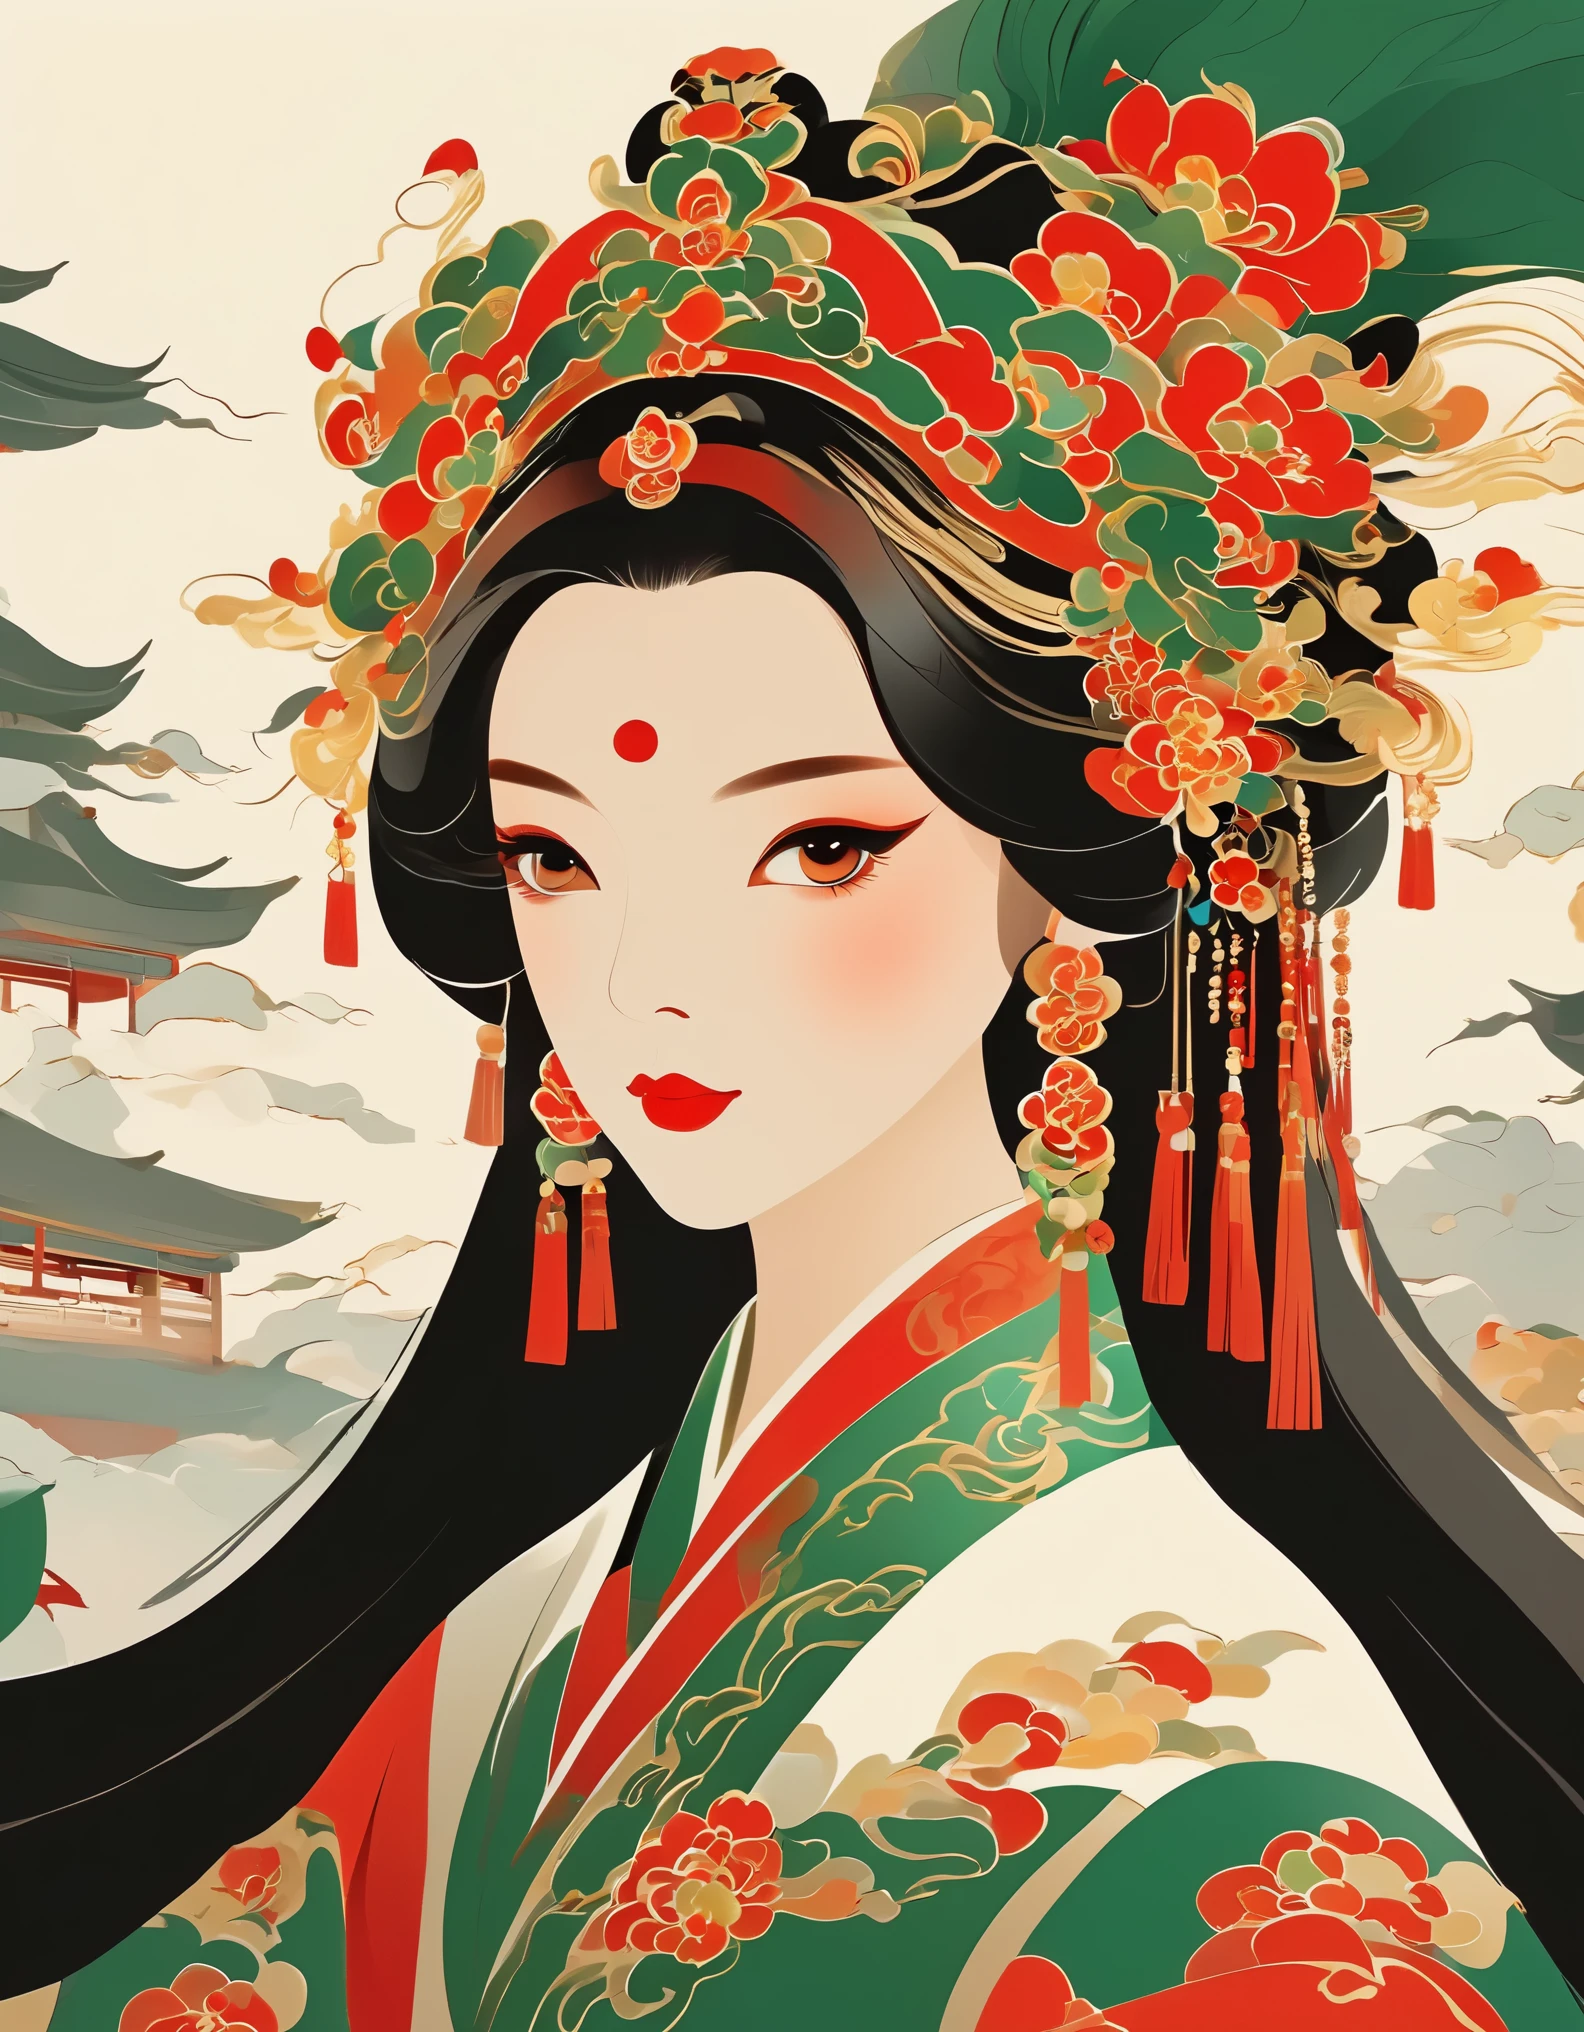 vector art，Peking opera girl，vector illustration vector illustration，Flat design style Flat design style，flat illustration flat illustration，，minimalism minimalism，Liu Danzhai，Chinese cultureChinese culture，Flat national style，The high-end sense of red and green CP，The ancient charm of Chinese style，Only Guofeng can do it, right?，The high-end and subtle beauty is really amazing